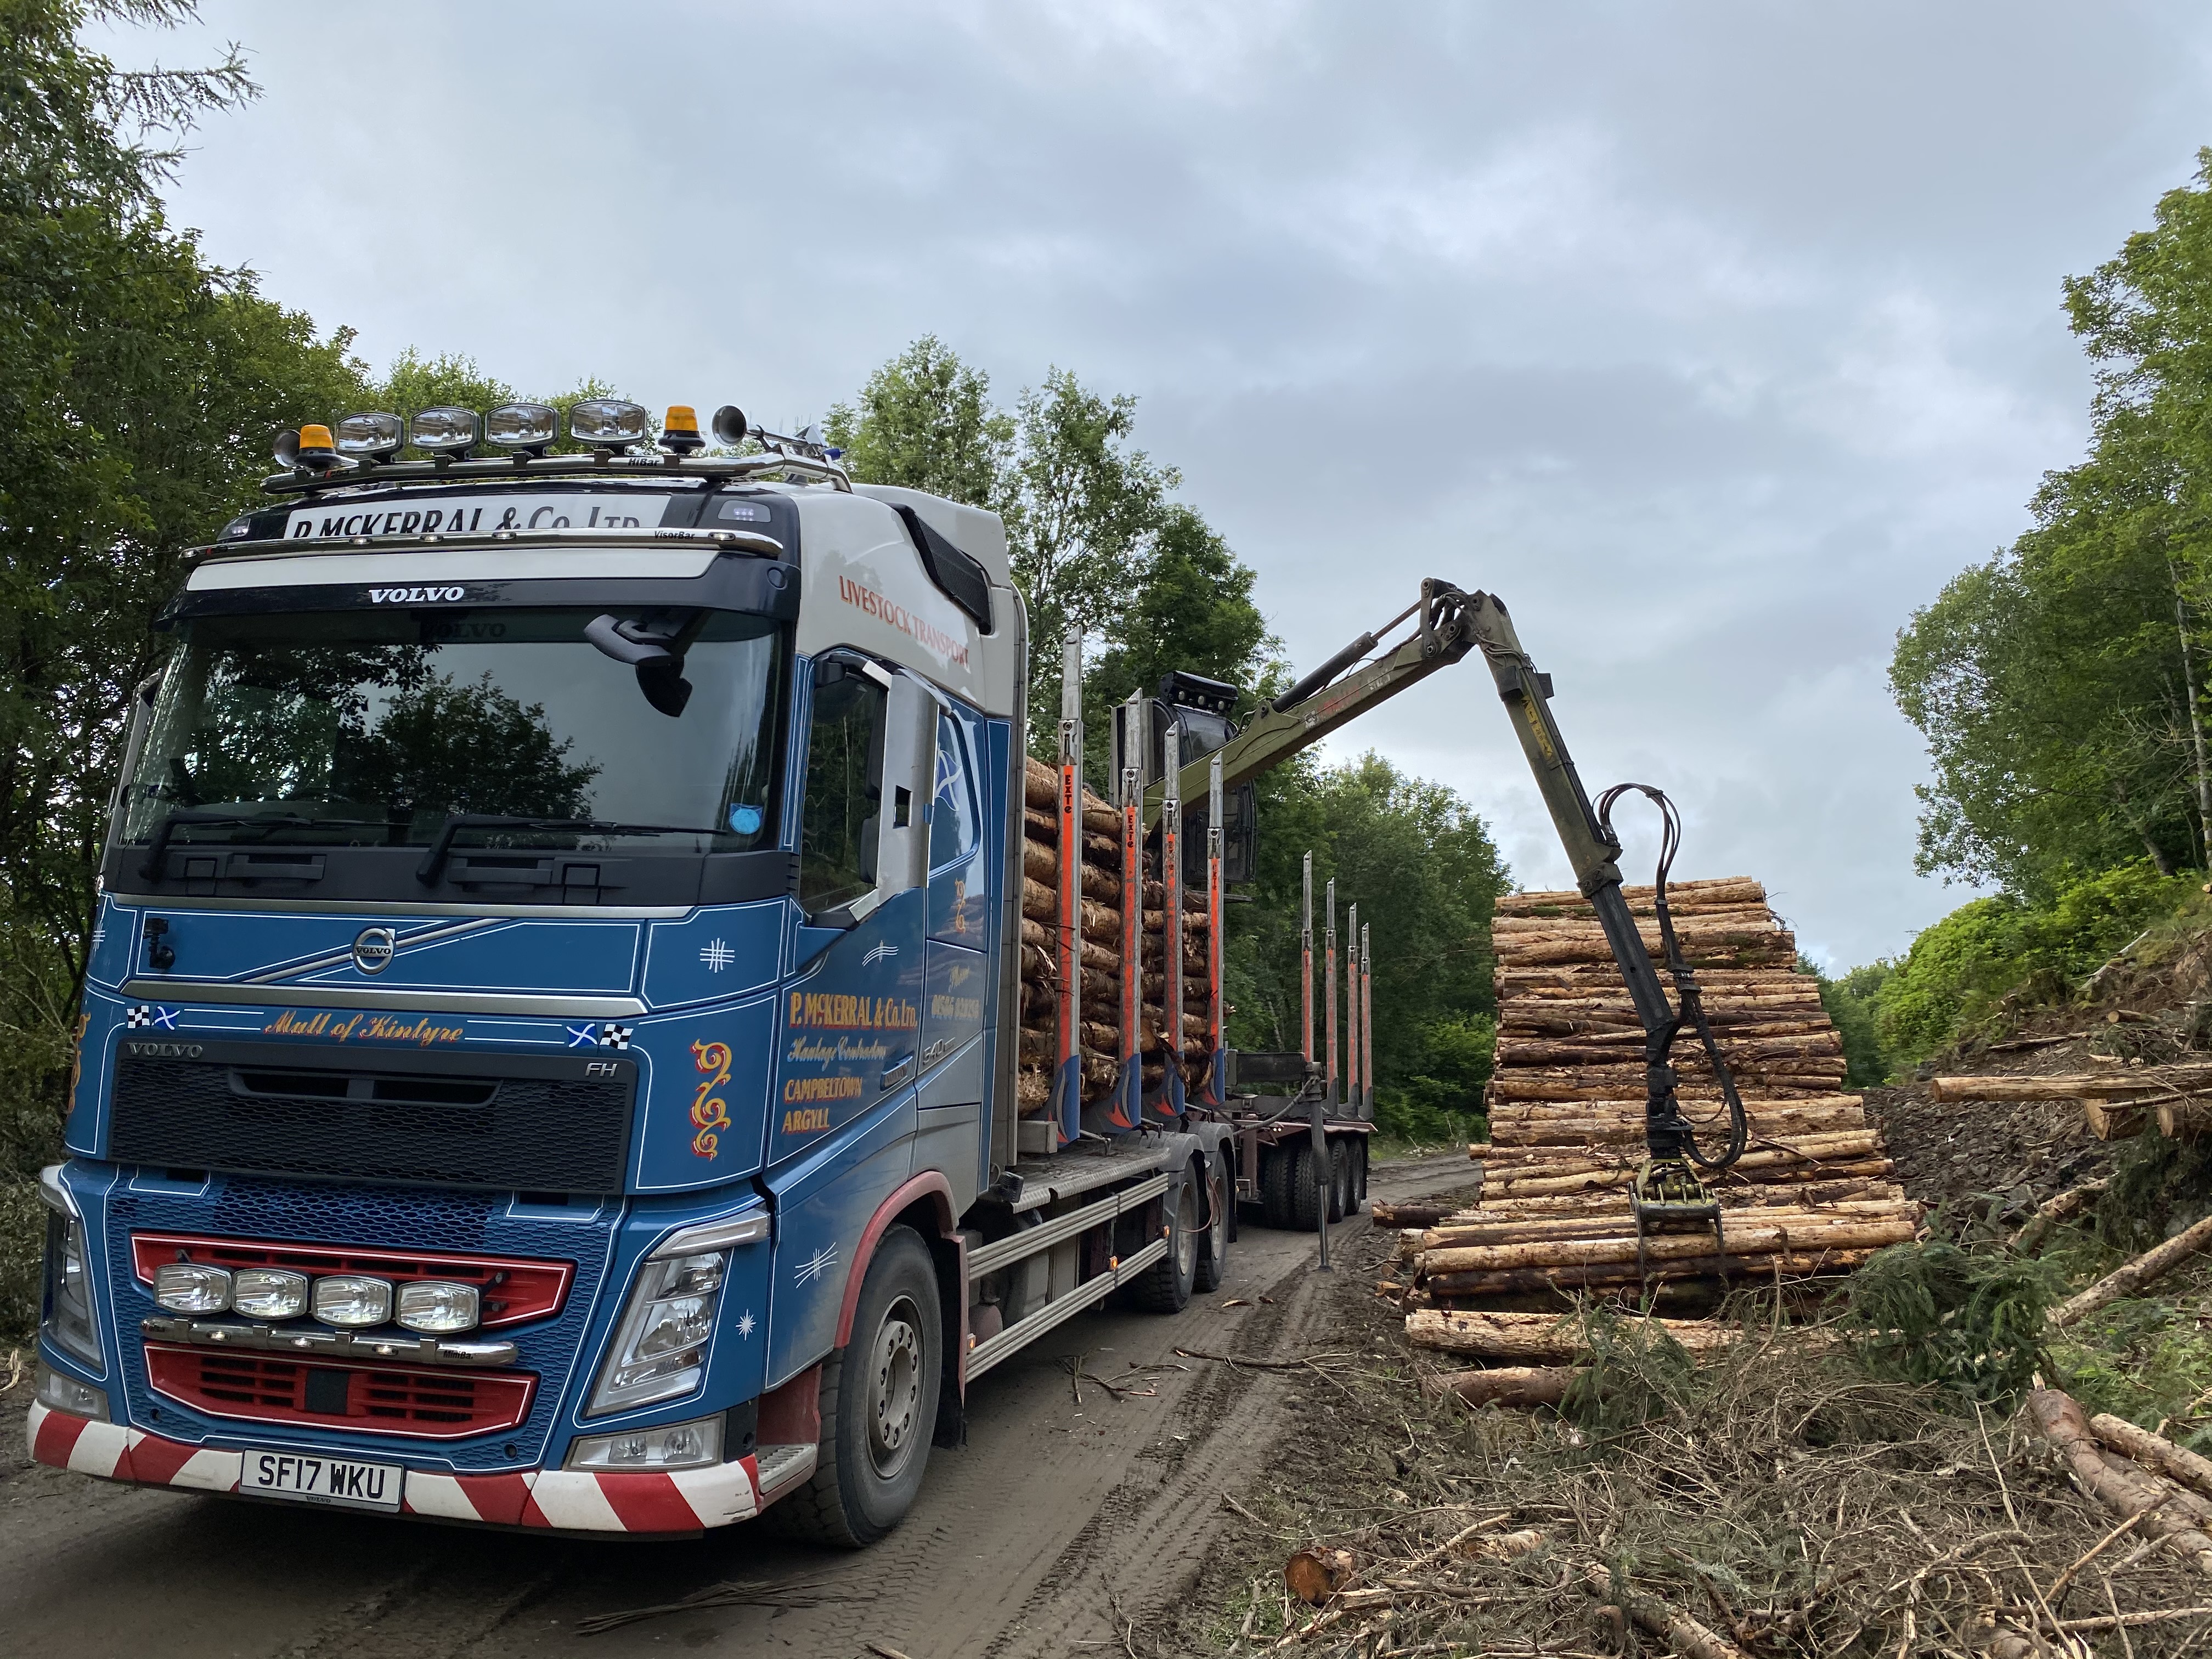 £7 million for timber transport projects